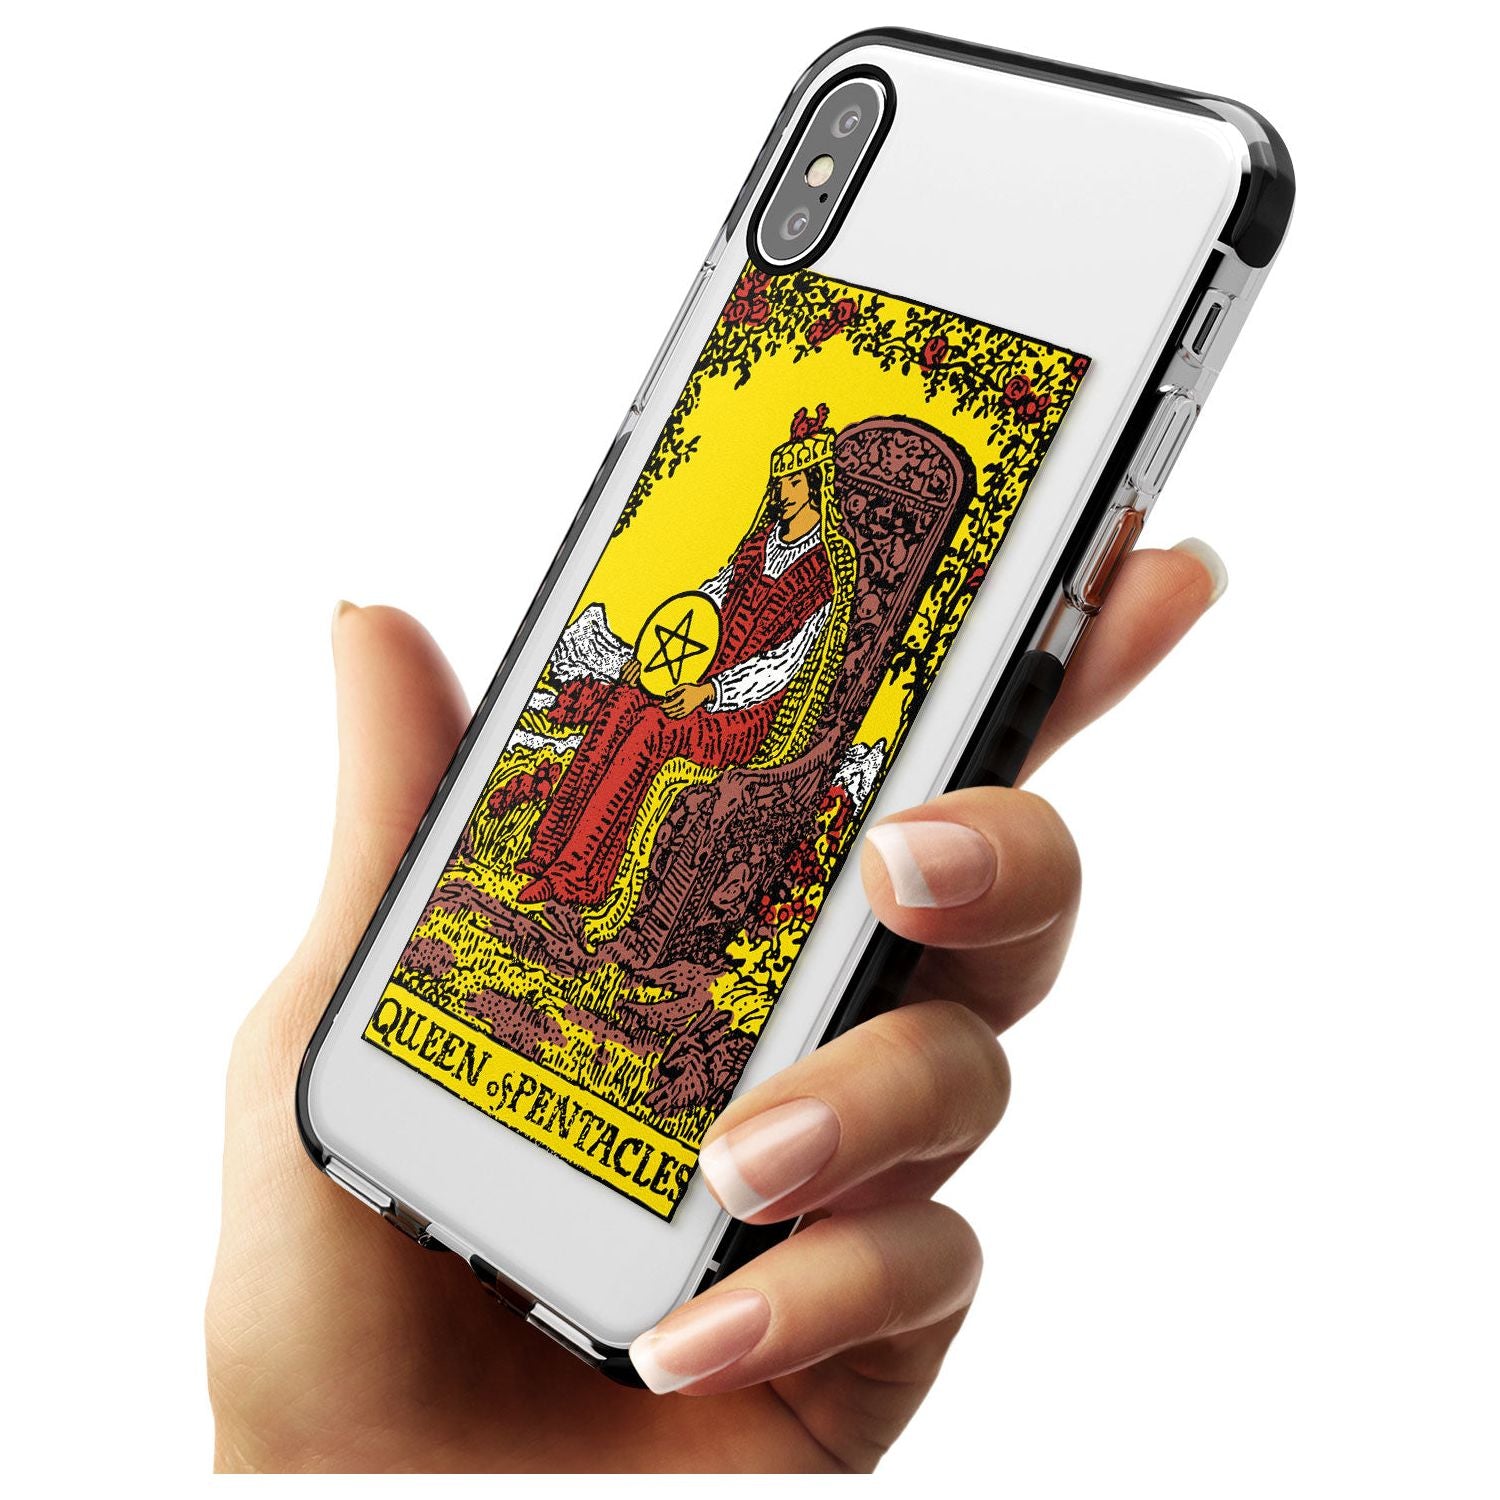 Queen of Pentacles Tarot Card - Colour Pink Fade Impact Phone Case for iPhone X XS Max XR